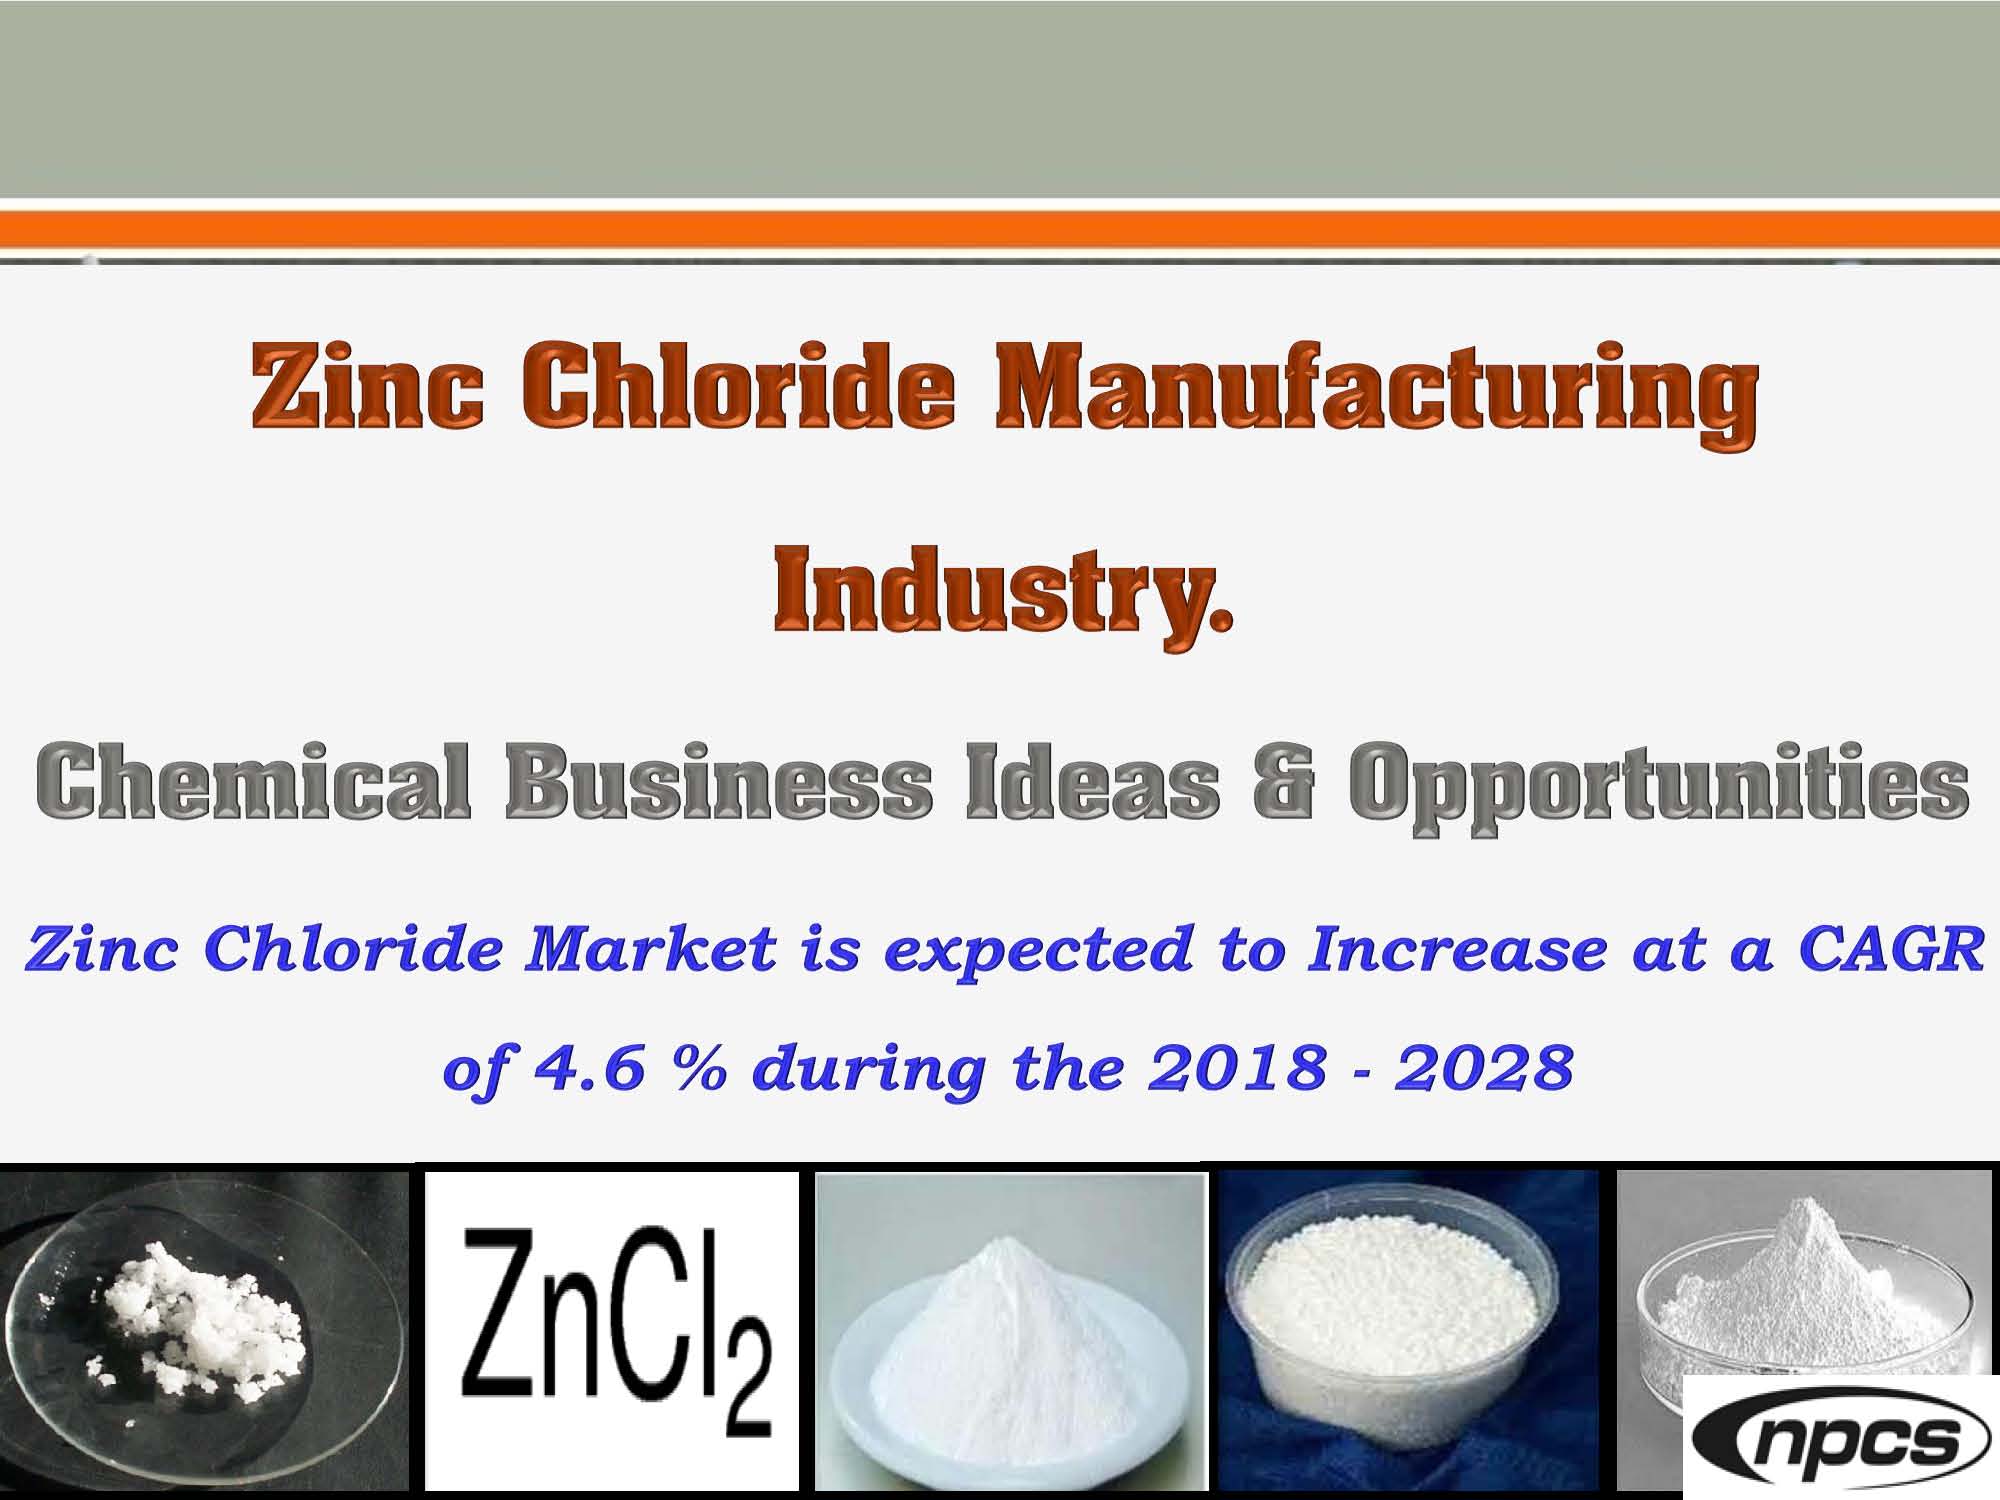 Zinc Chloride Manufacturing Industry